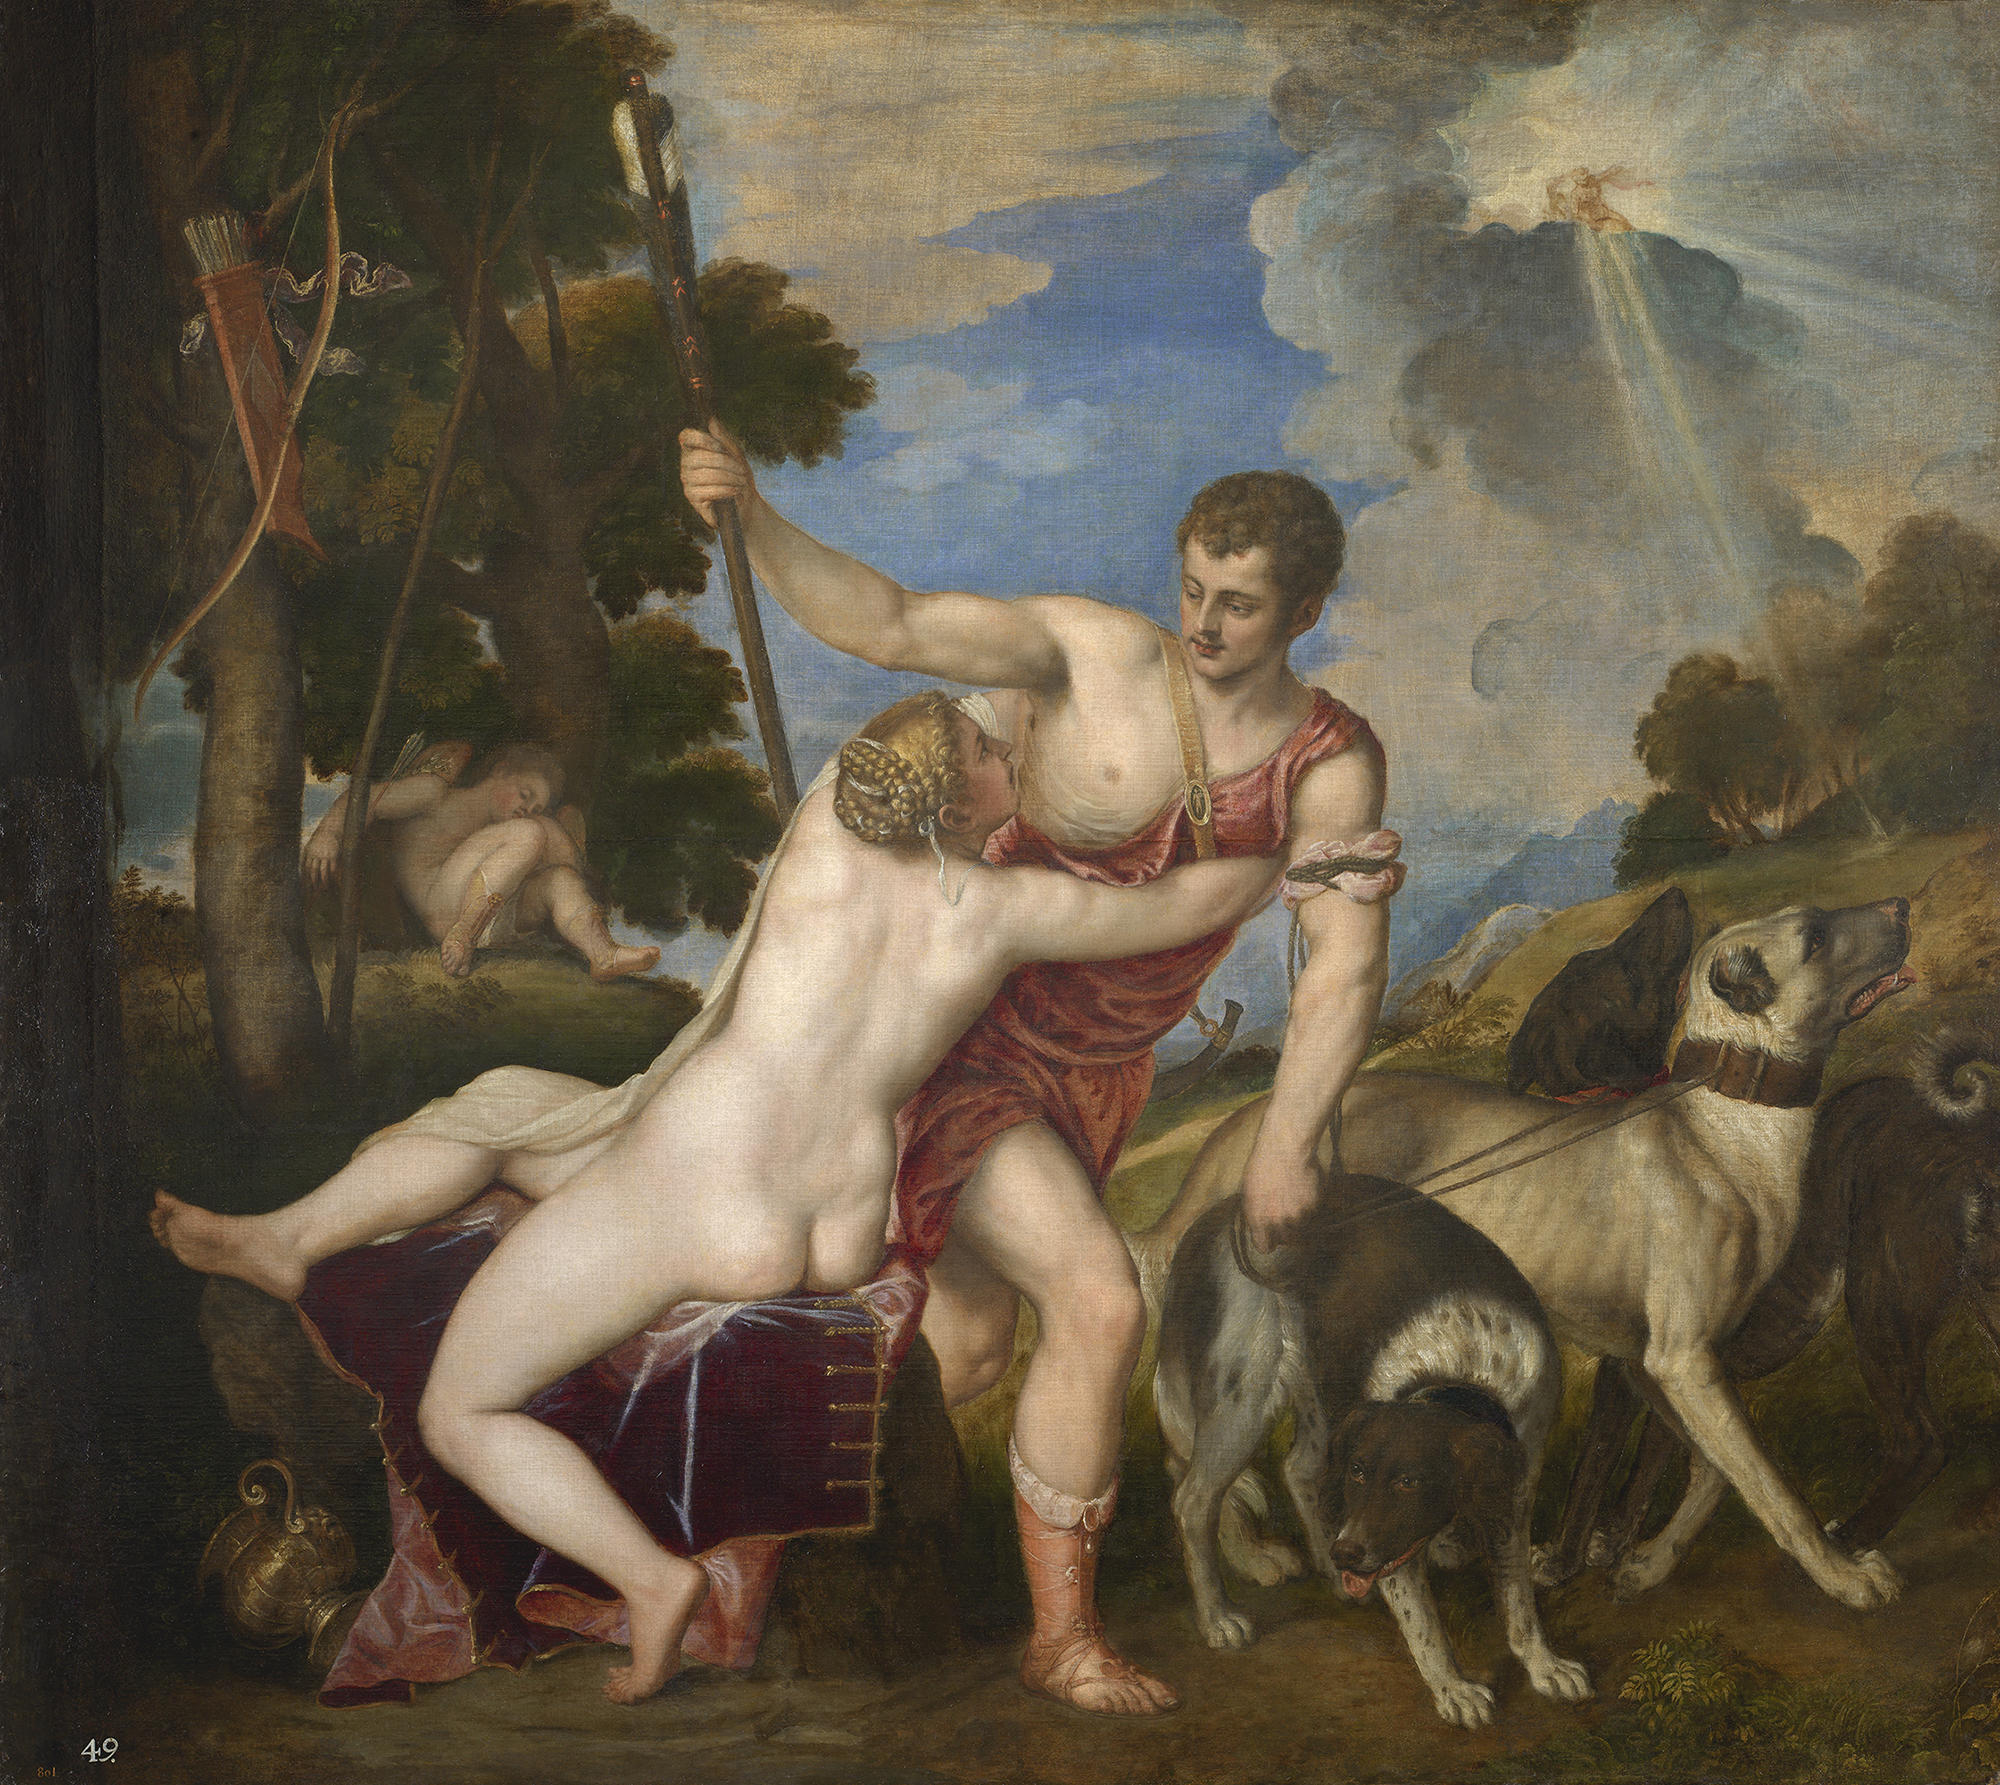 Venus and Adonis by Titian.